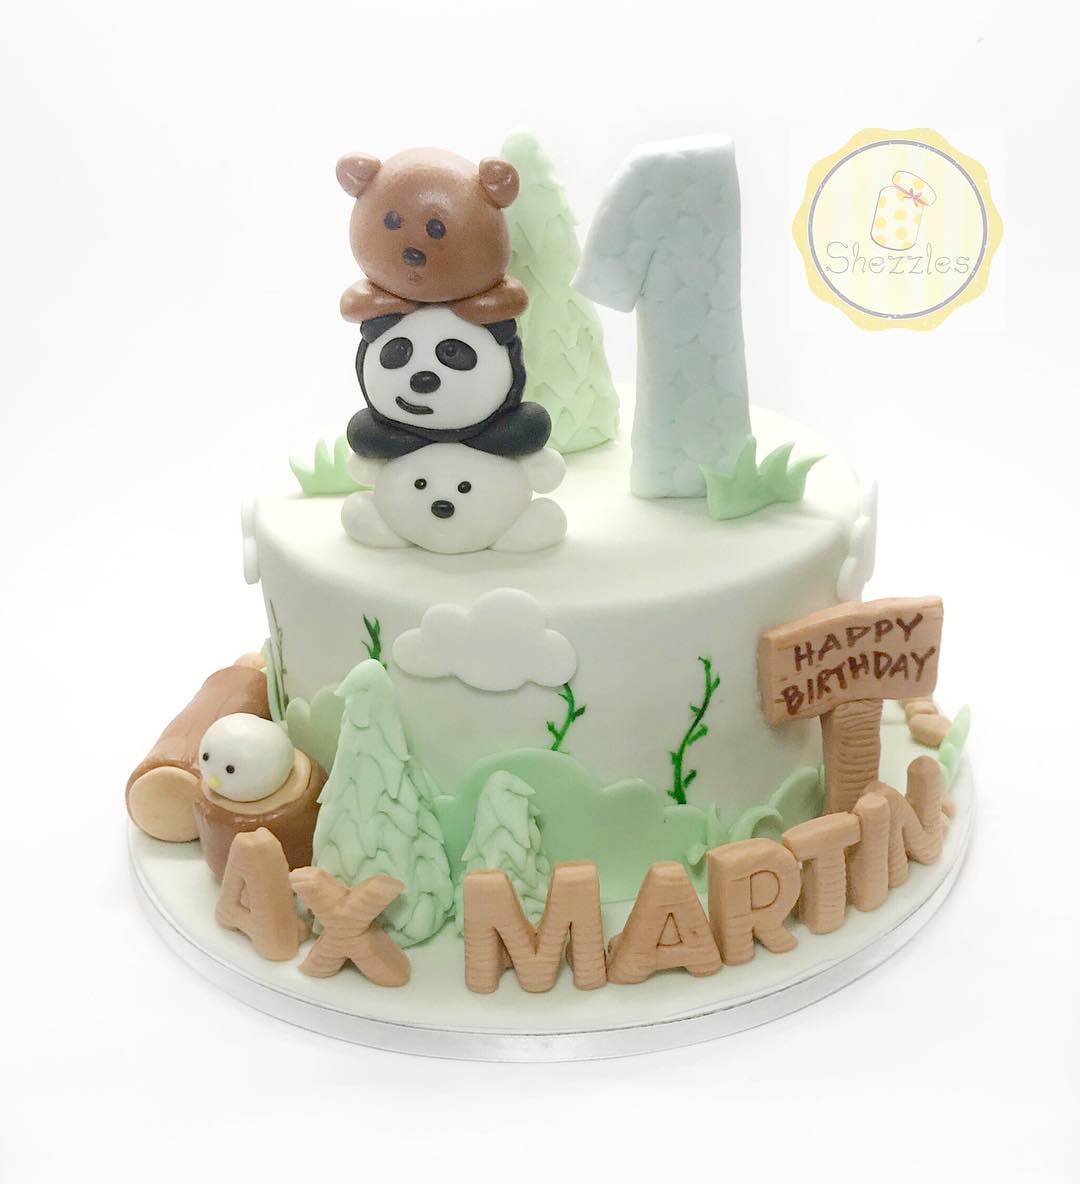 Featured image of post Themed We Bare Bears Cake Design Three brother bears awkwardly attempt to find their place in civilized society whether they re looking for food trying to make human friends or scheming to become famous on the internet